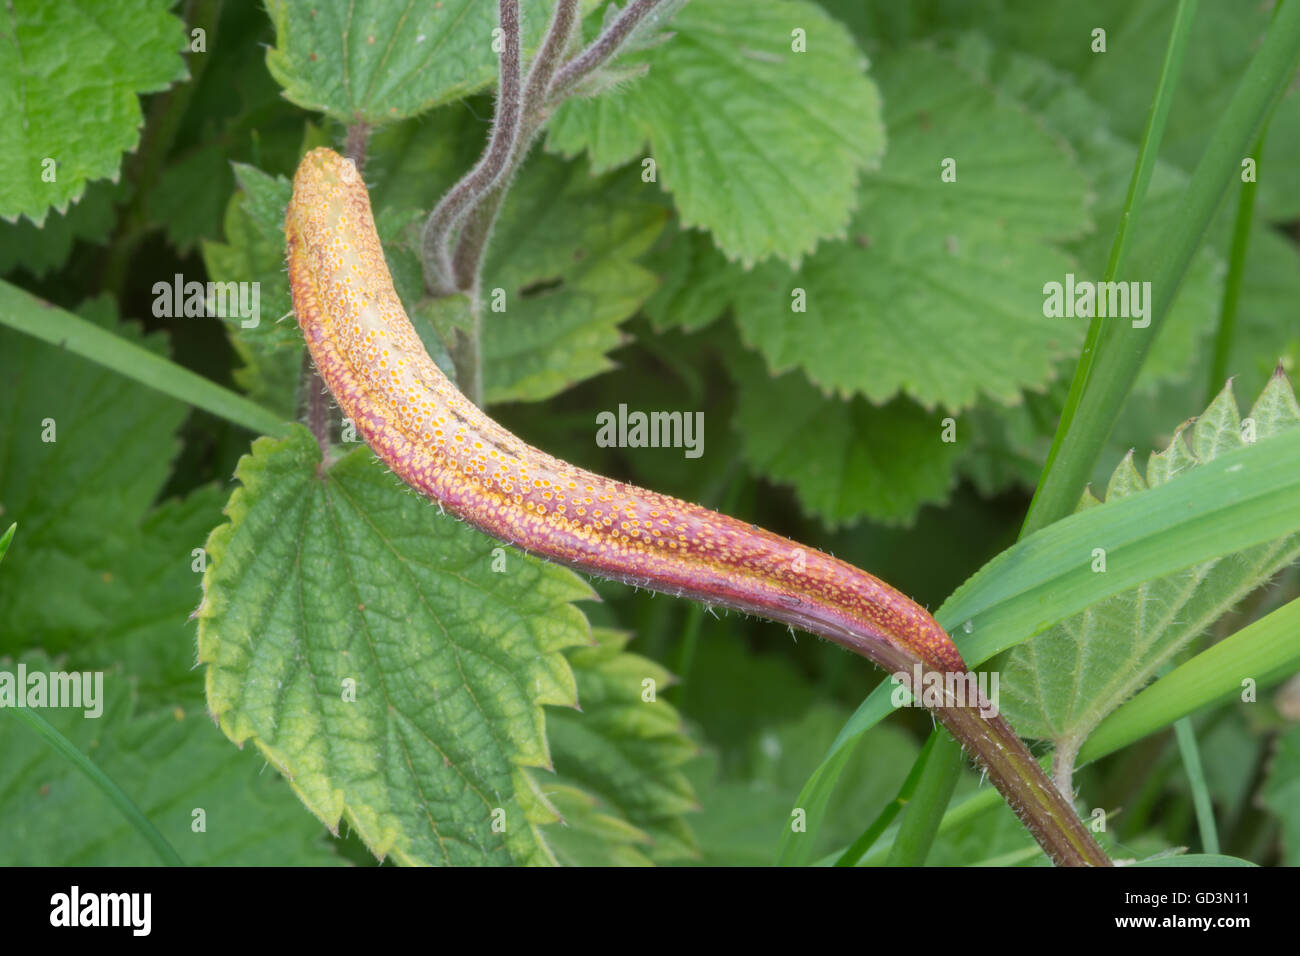 Nettle Cluster-cup Rust Fungus (Puccinia urticata) Stock Photo